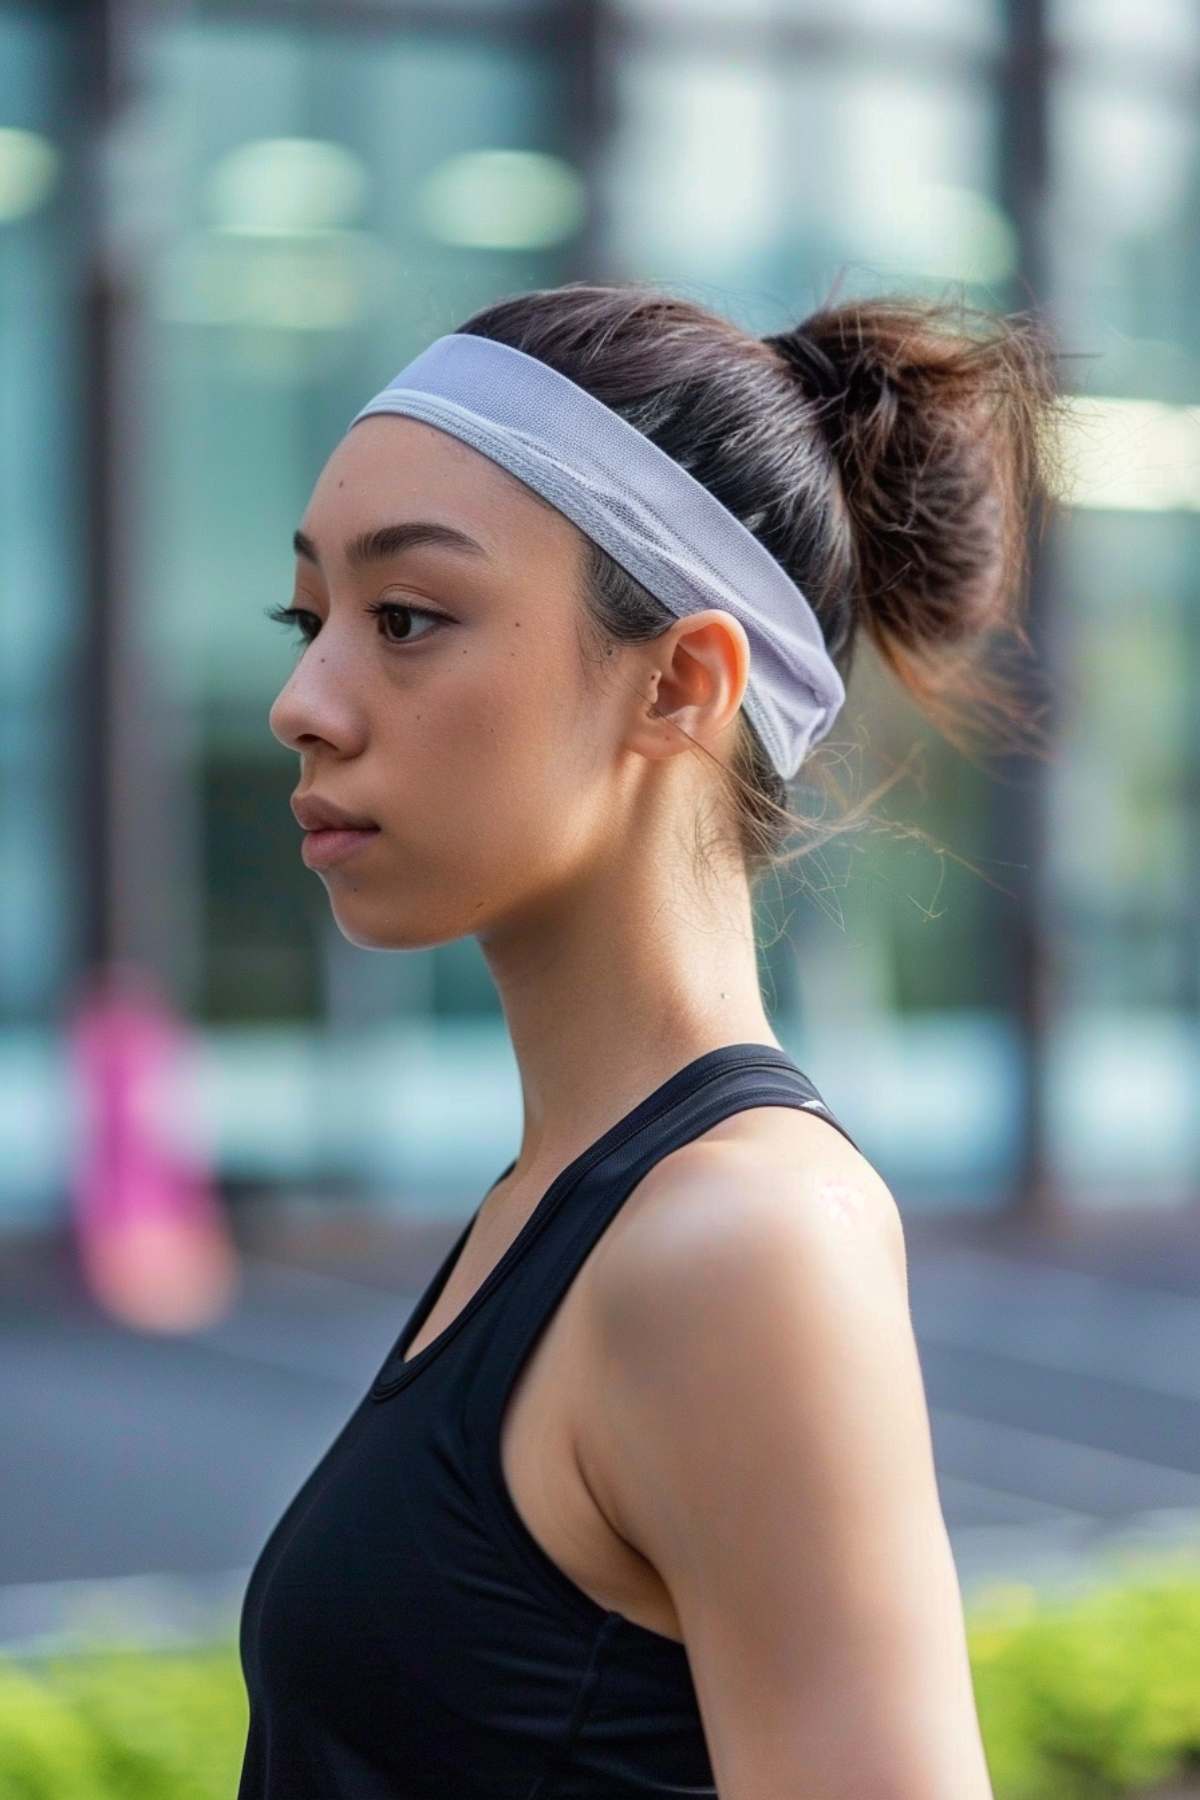 Sporty high messy bun paired with a light gray headband, designed to keep hair tidy and focus sharp during physical activities.